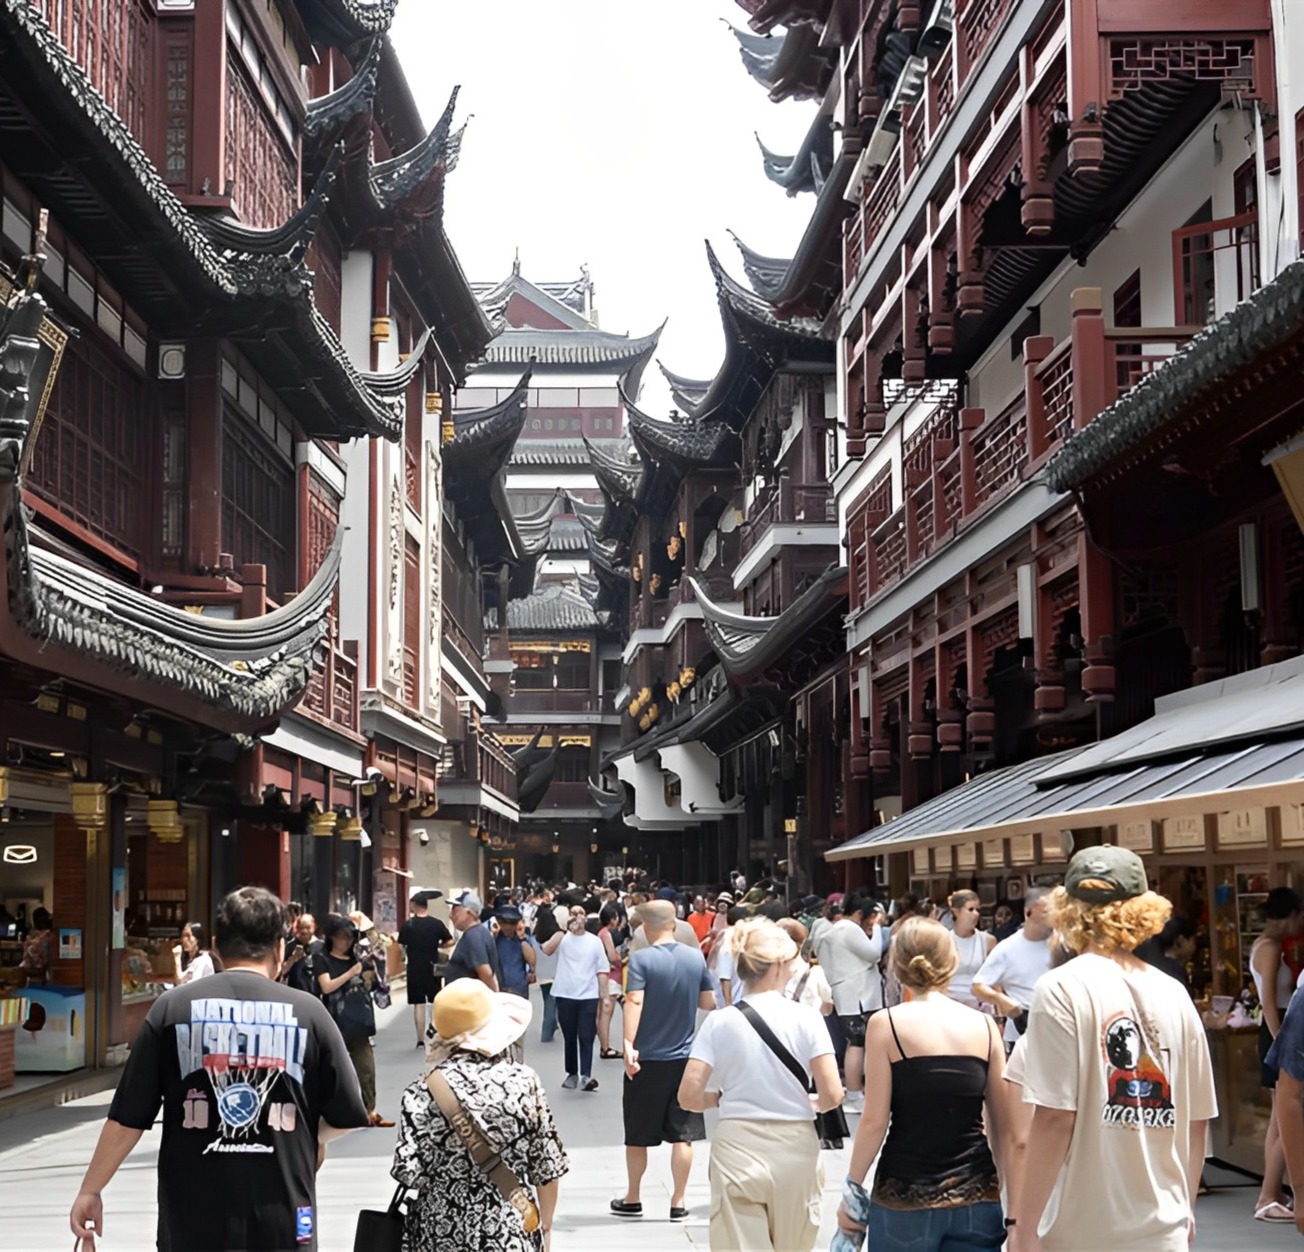 Shanghai takes big steps on payment convenience for foreign visitors